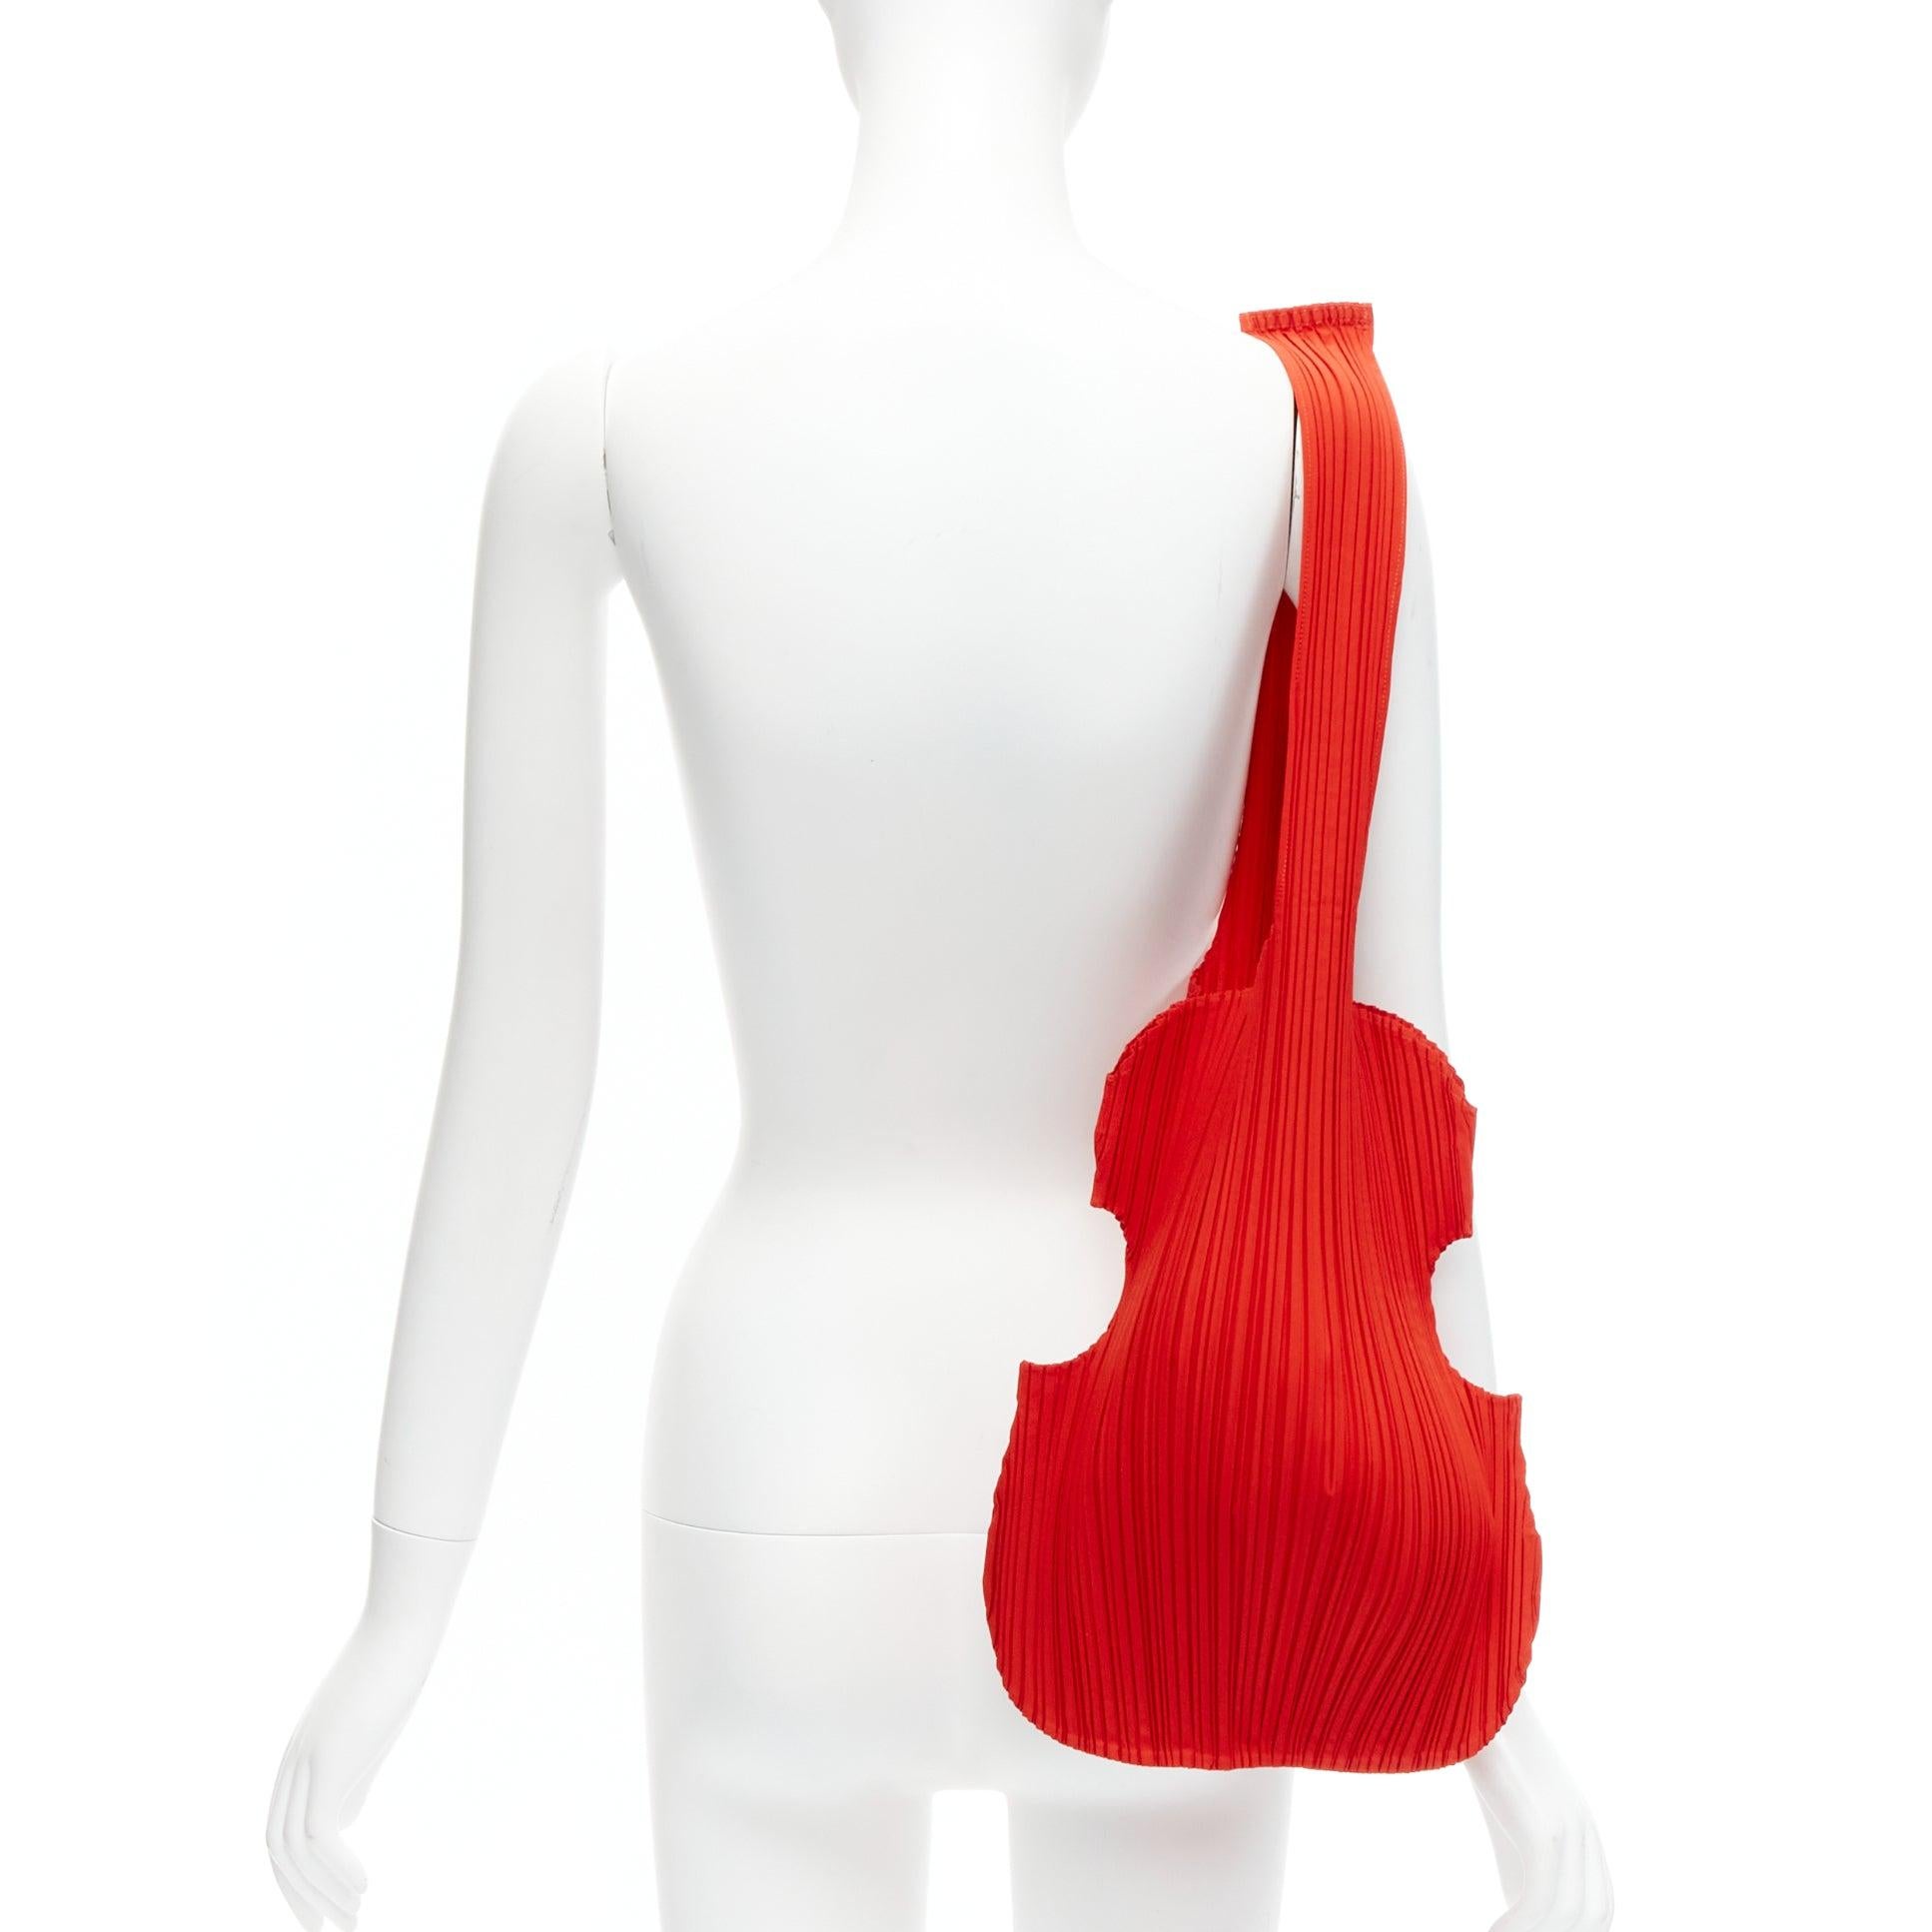 new ISSEY MIYAKE PLEATS PLEASE rare limited edition red plisse guitar tote bag
Reference: TGAS/D00604
Brand: Issey Miyake
Collection: Pleats Please 2020
Material: Fabric
Color: Red
Pattern: Solid
Closure: Open Top
Extra Details: Design cut in a